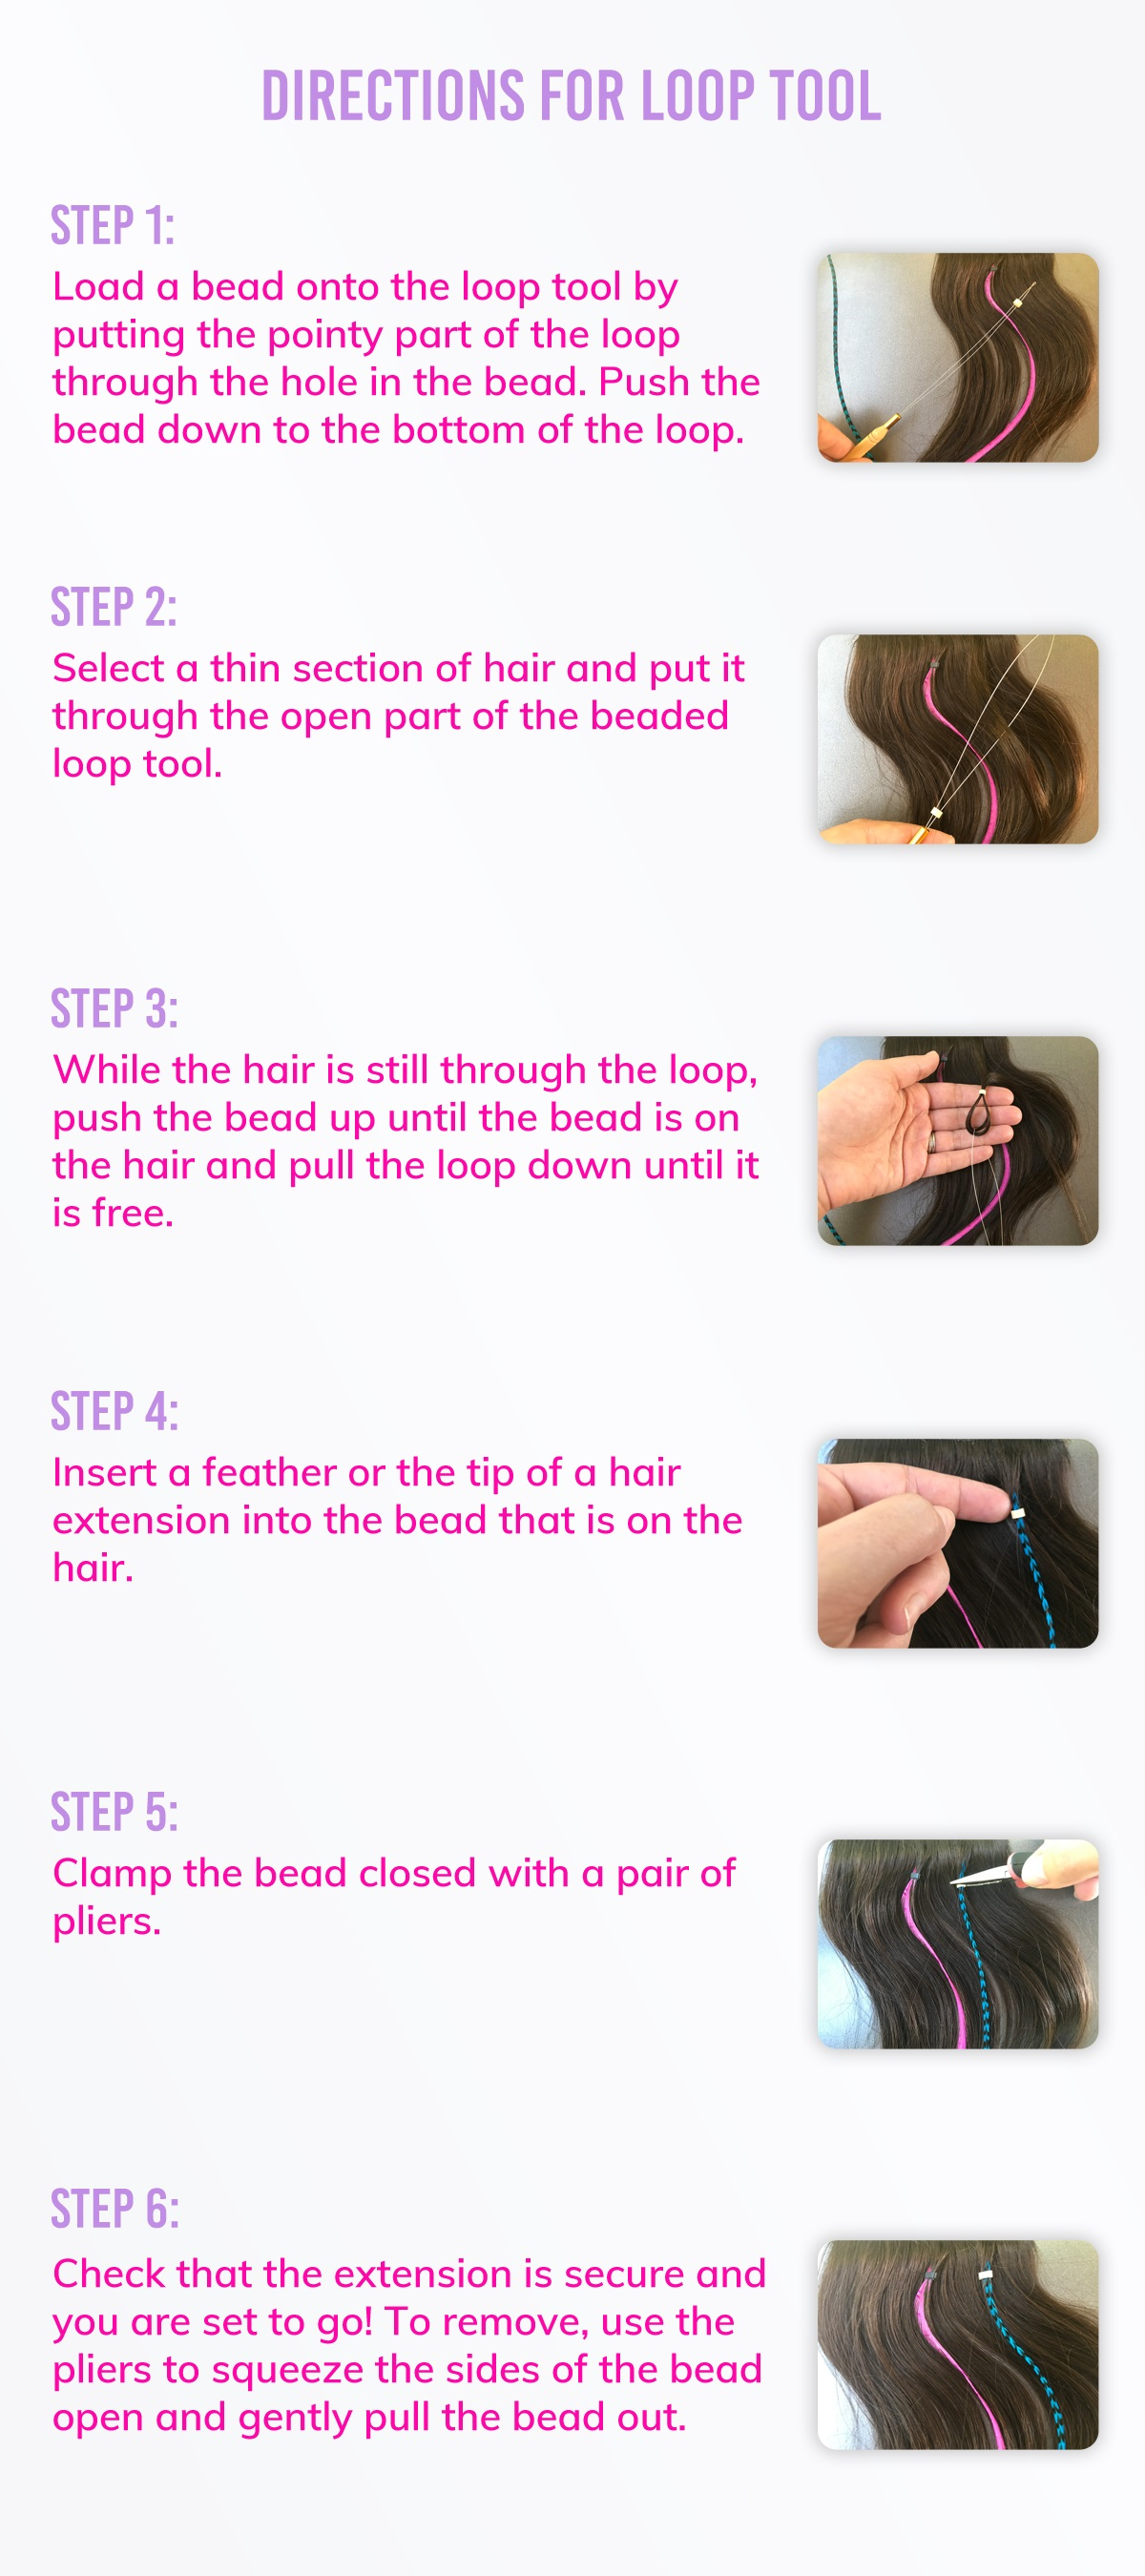 How To Add Feathers To Your Hair By Yourself! @Hairby_chrissy 